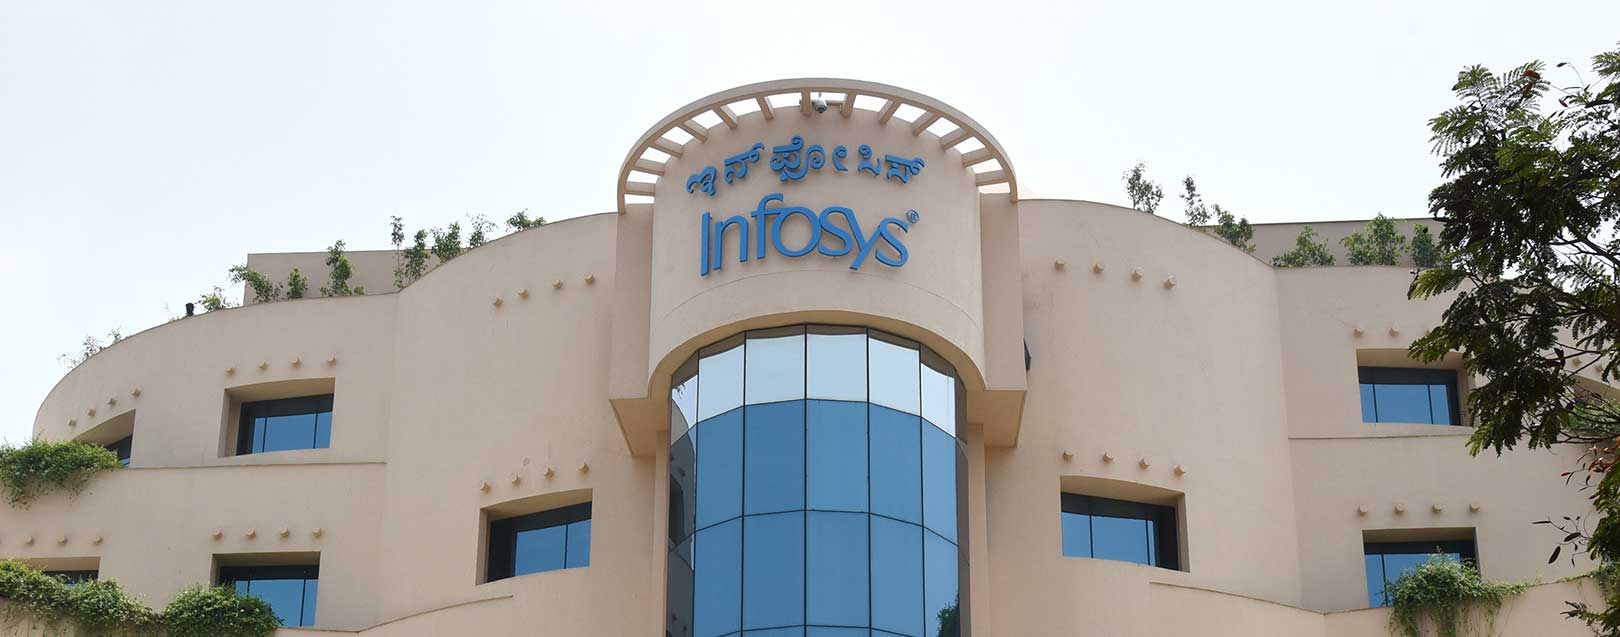 US Govt welcomes Infosys’ decision to hire 10,000 Americans